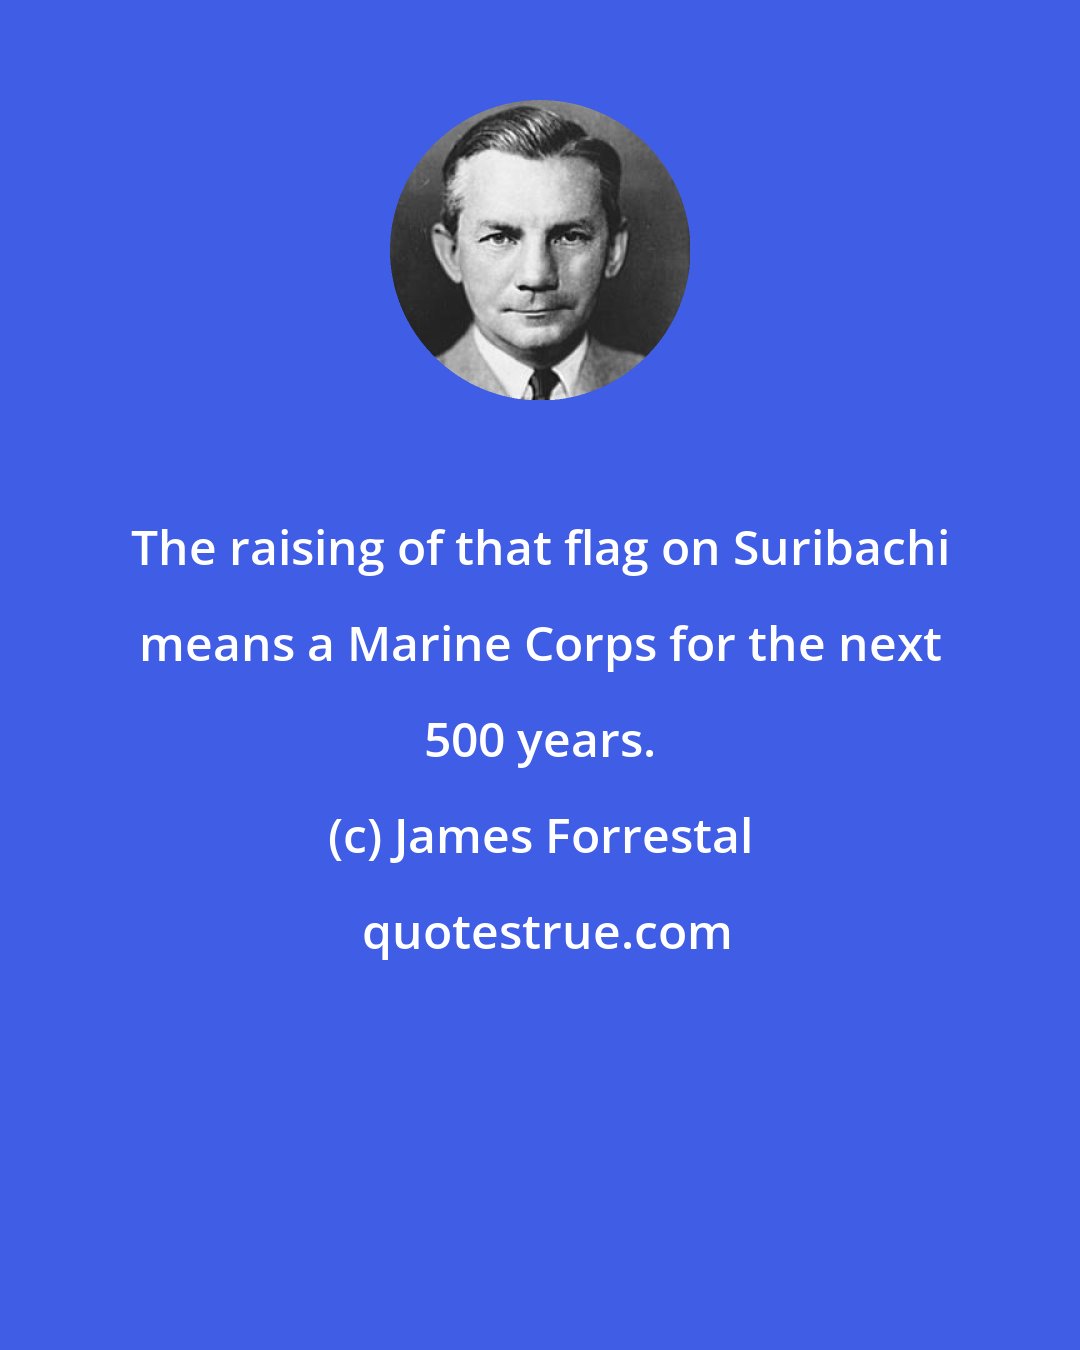 James Forrestal: The raising of that flag on Suribachi means a Marine Corps for the next 500 years.